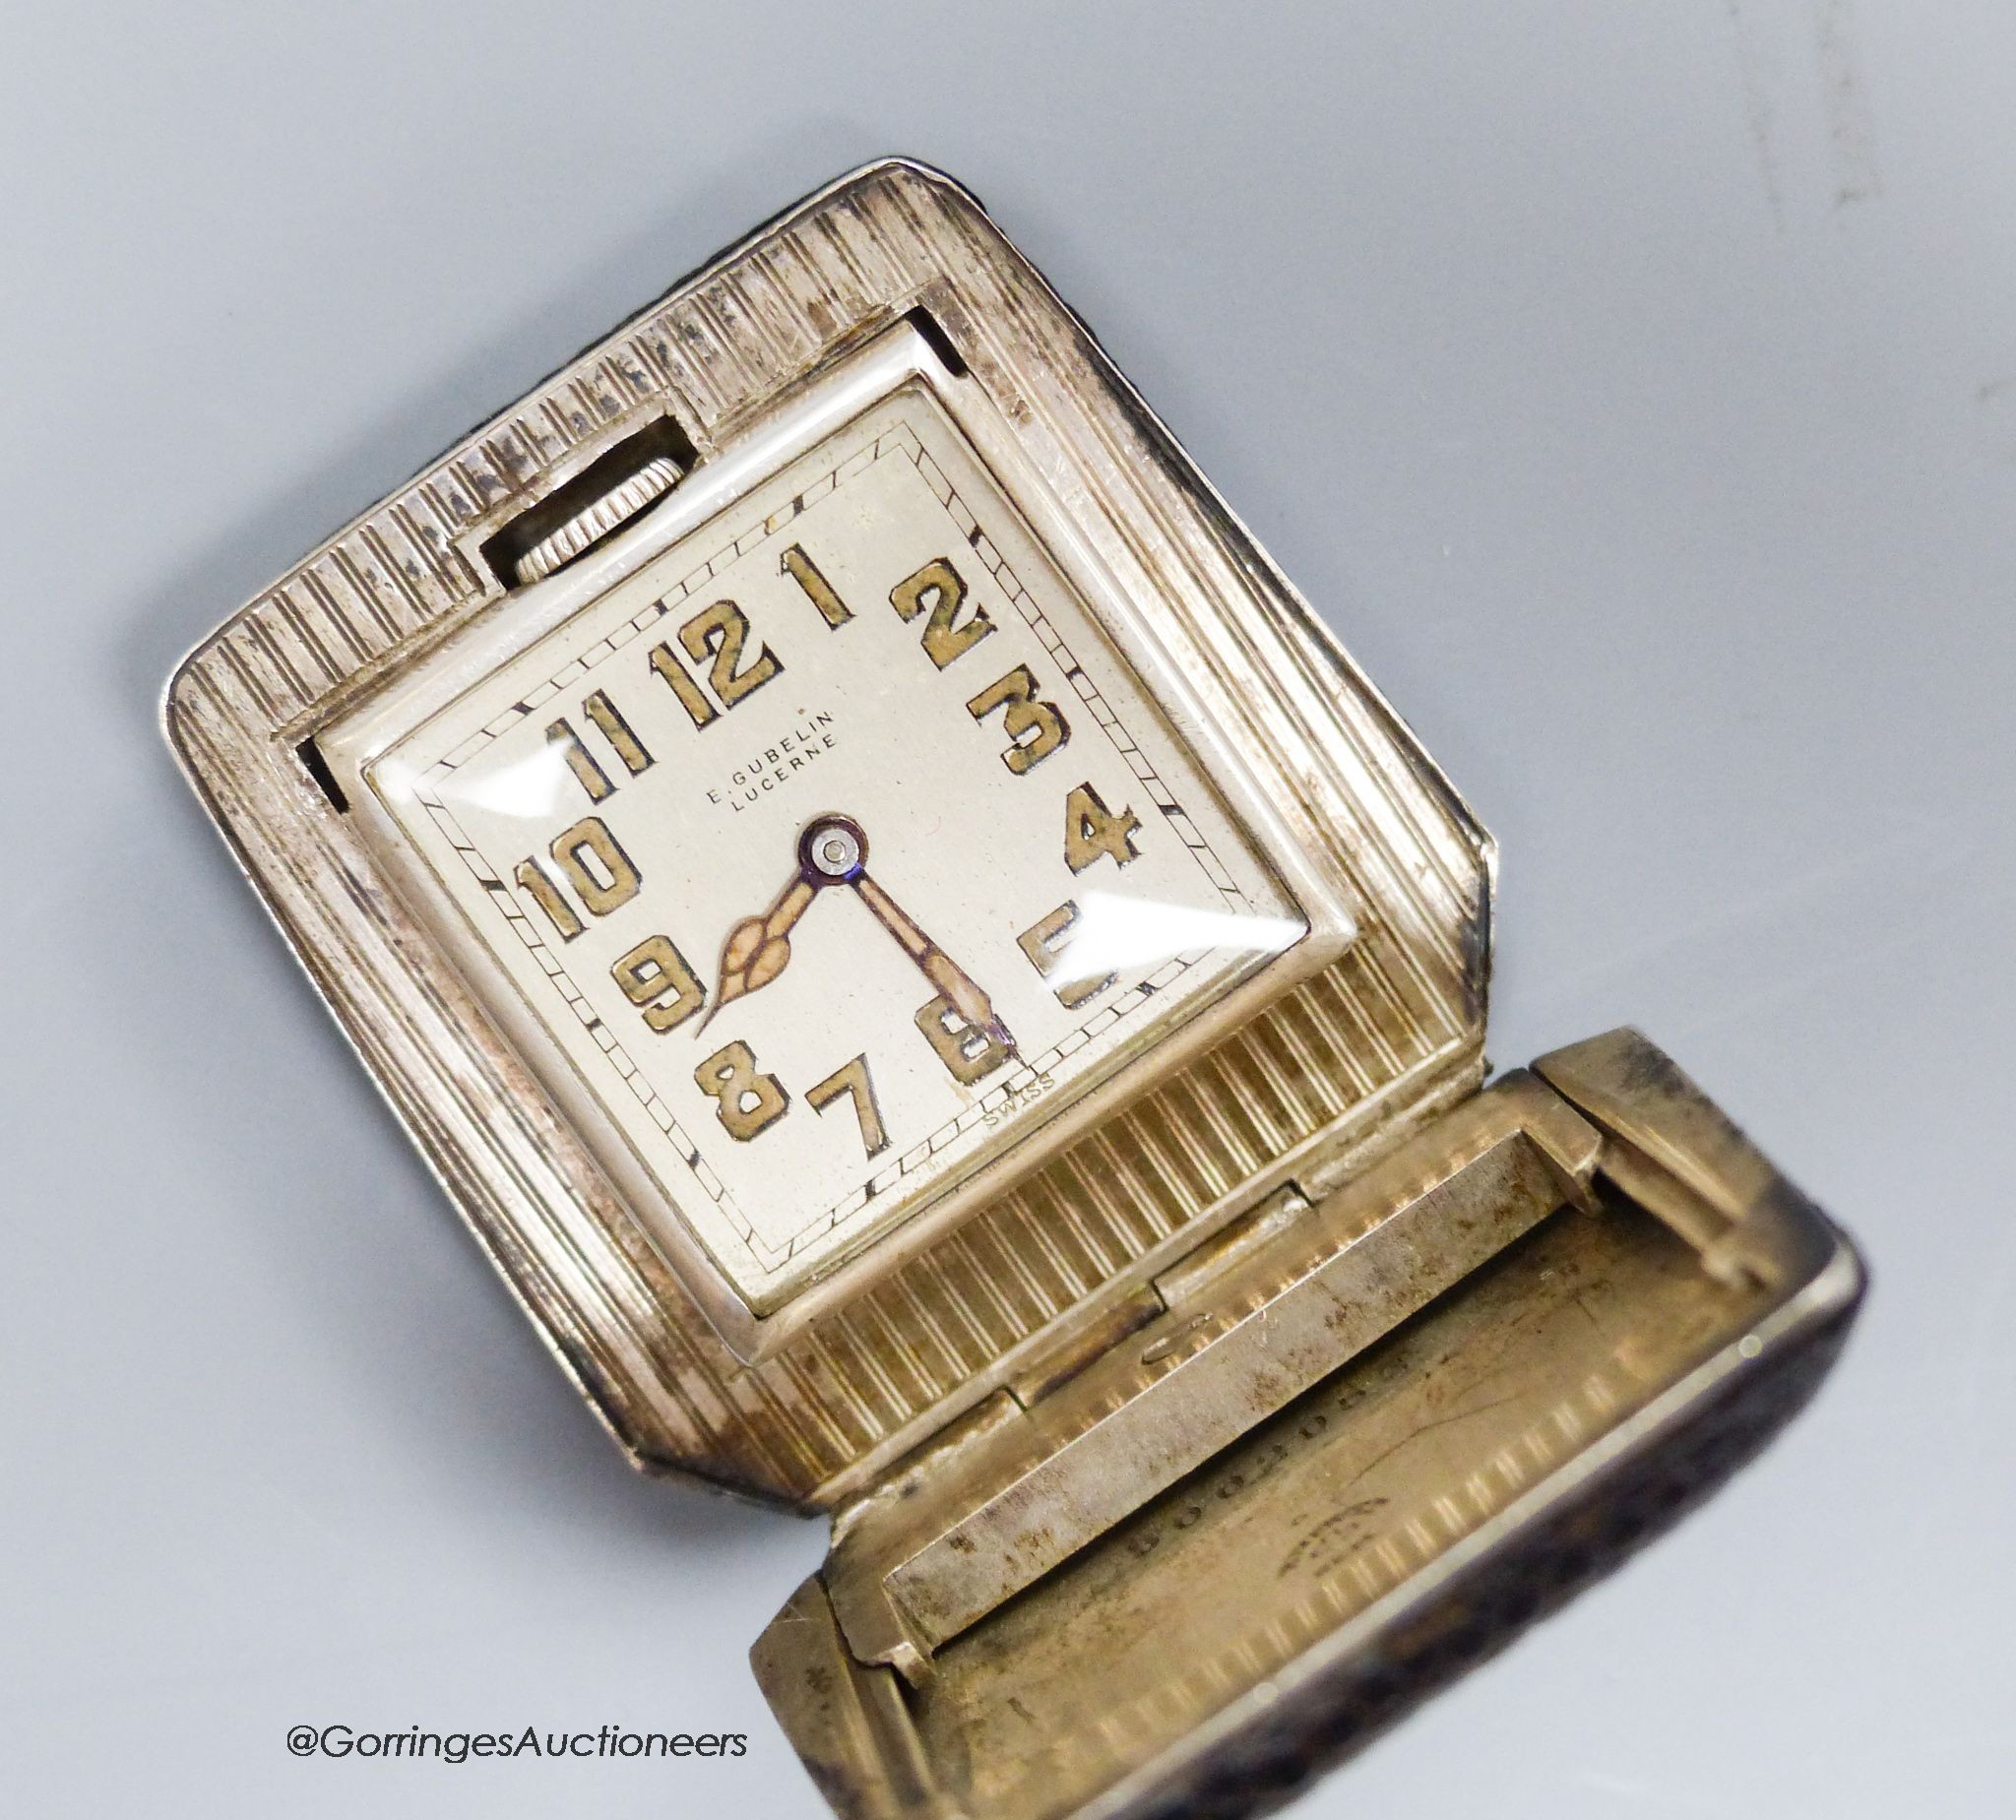 A silver Gubelin travelling watch with snakeskin outer case, signed dial and Eterna movement